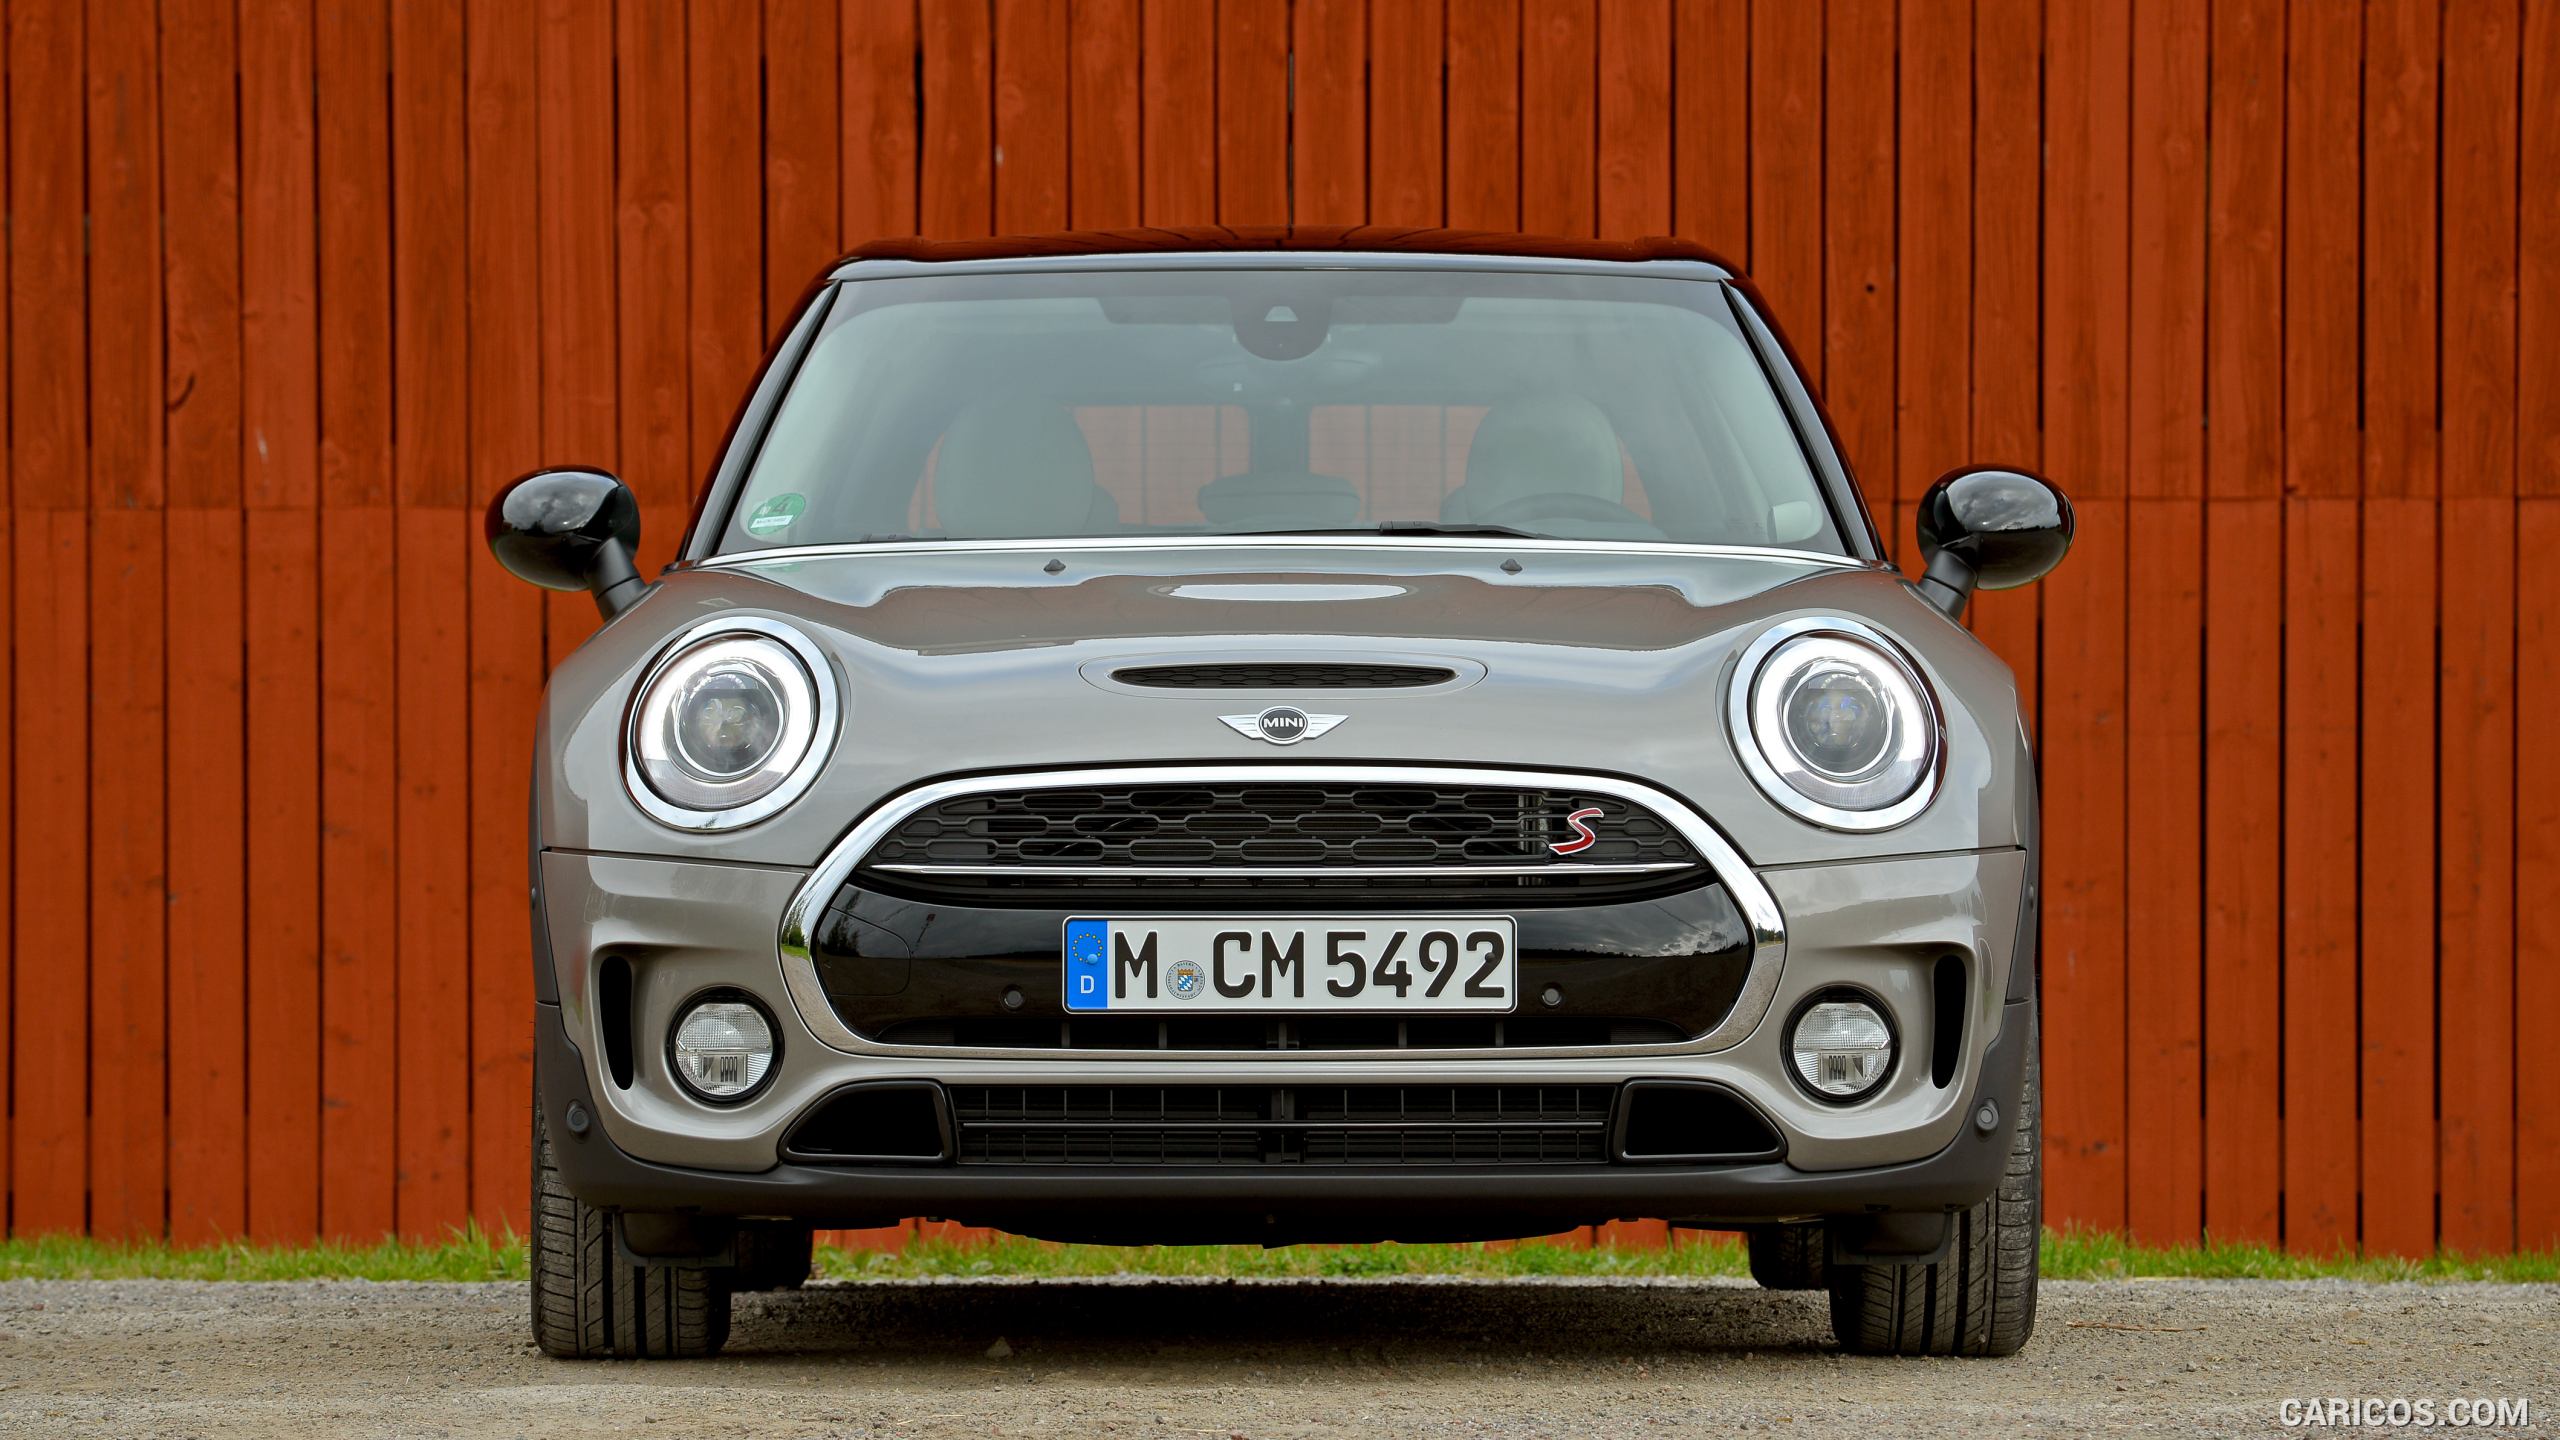 2016 MINI Cooper S Clubman in Metallic Melting Silver - Front, #190 of 380